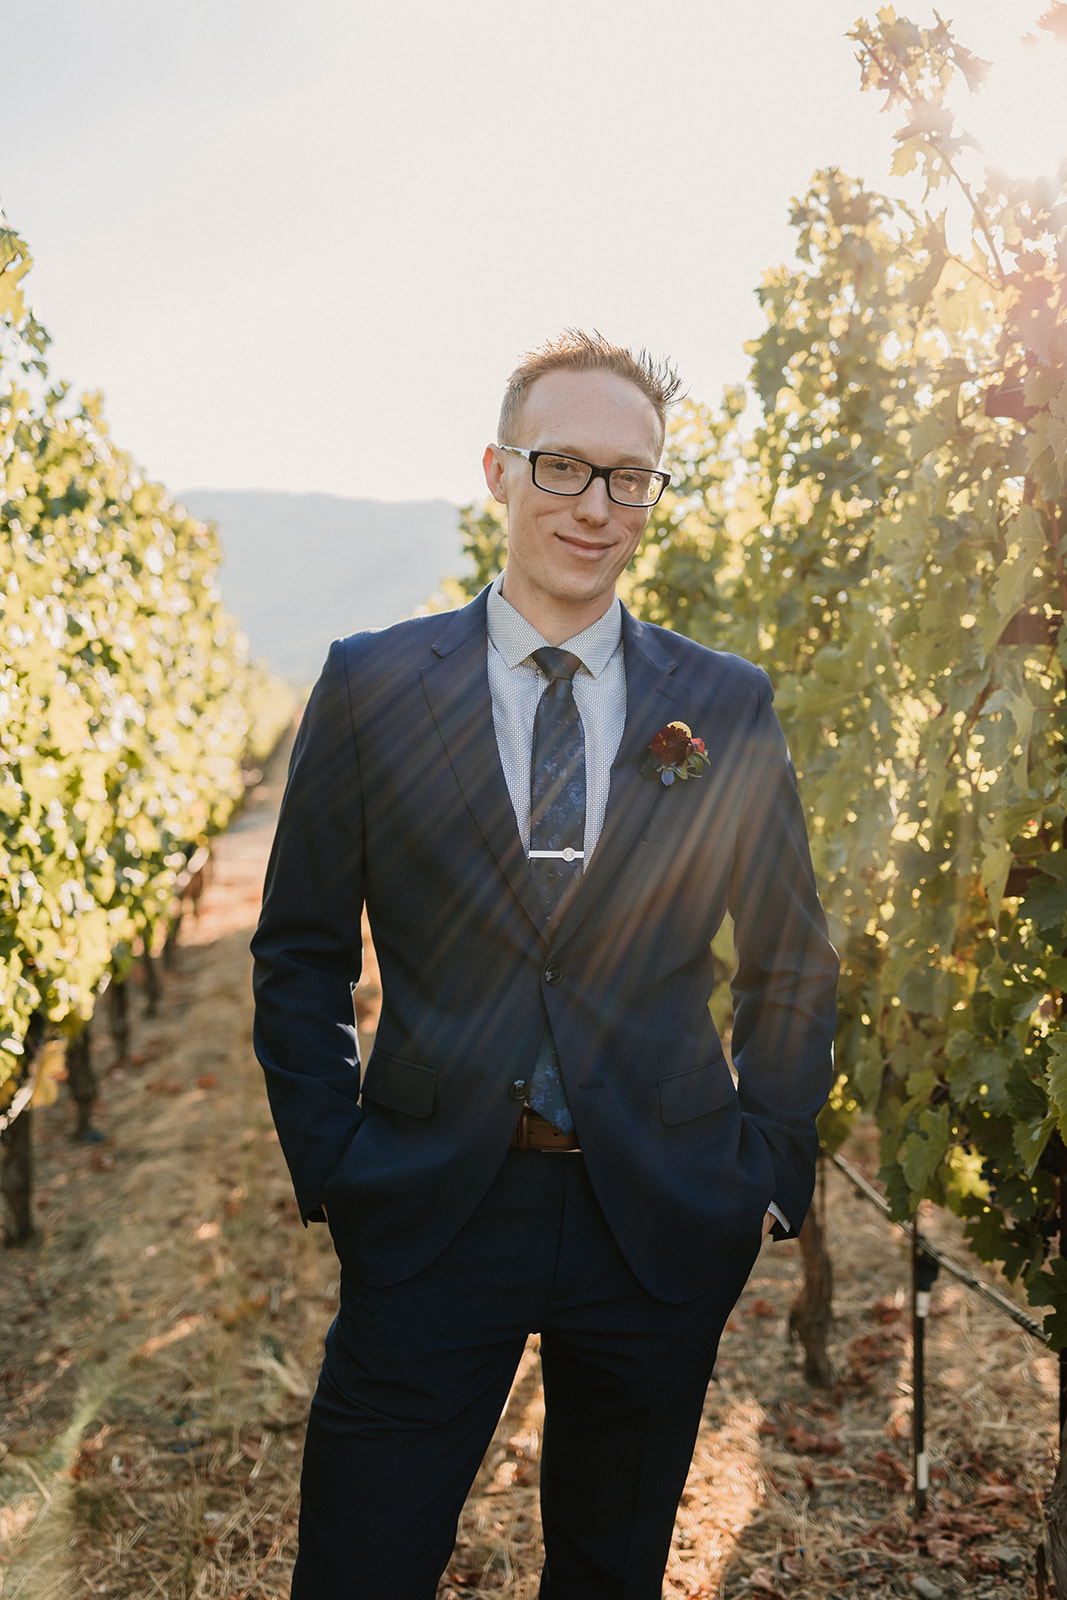 A man in a suit and glasses stands confidently in a vineyard, with sunlight filtering through the grapevines.